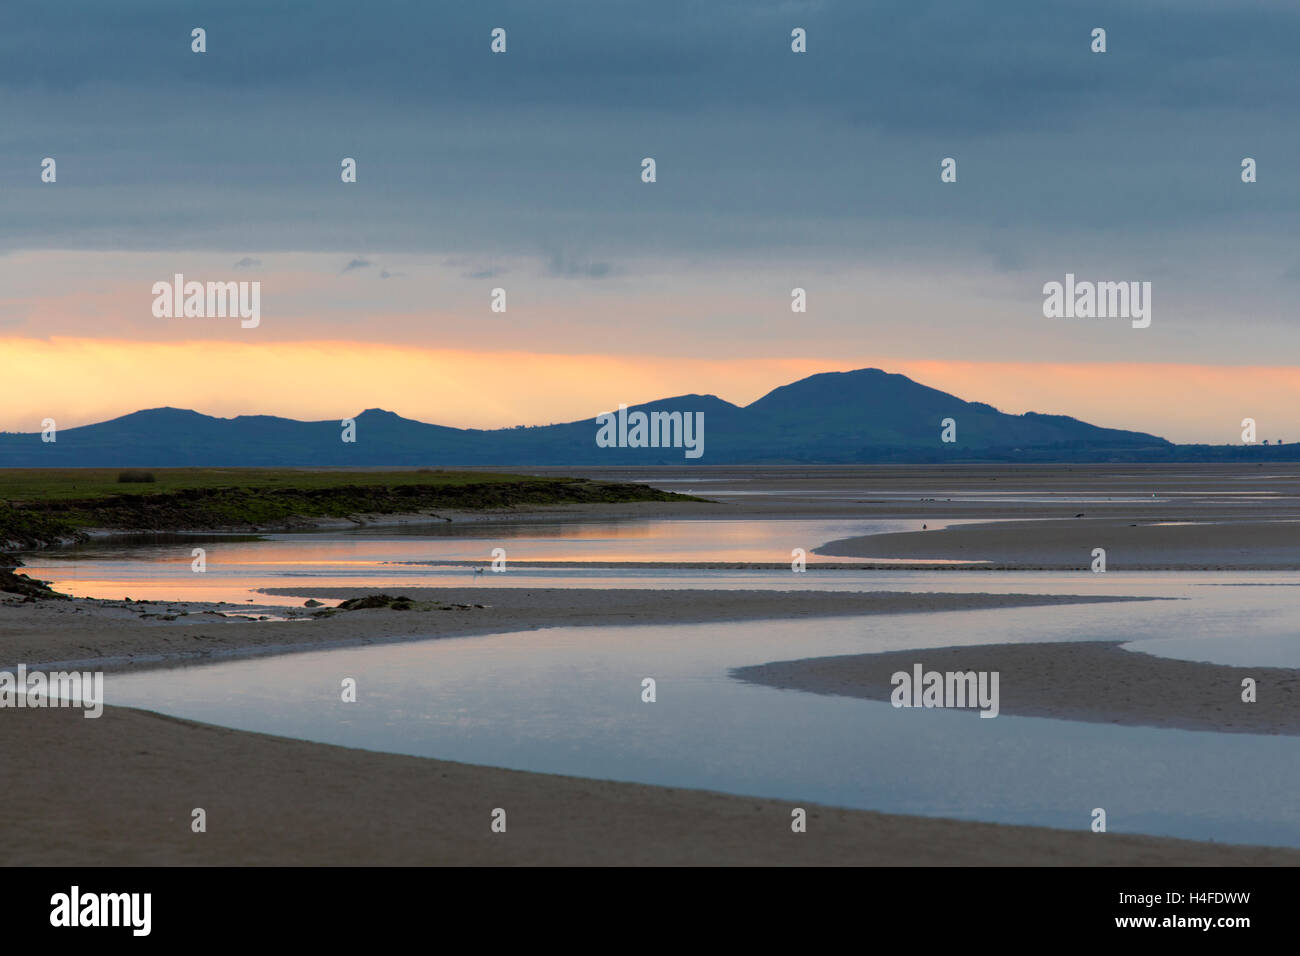 Sunset over the Llyn Peninsula from the Afon Glaslyn, Snowdonia National Park, North Wales, UK Stock Photo